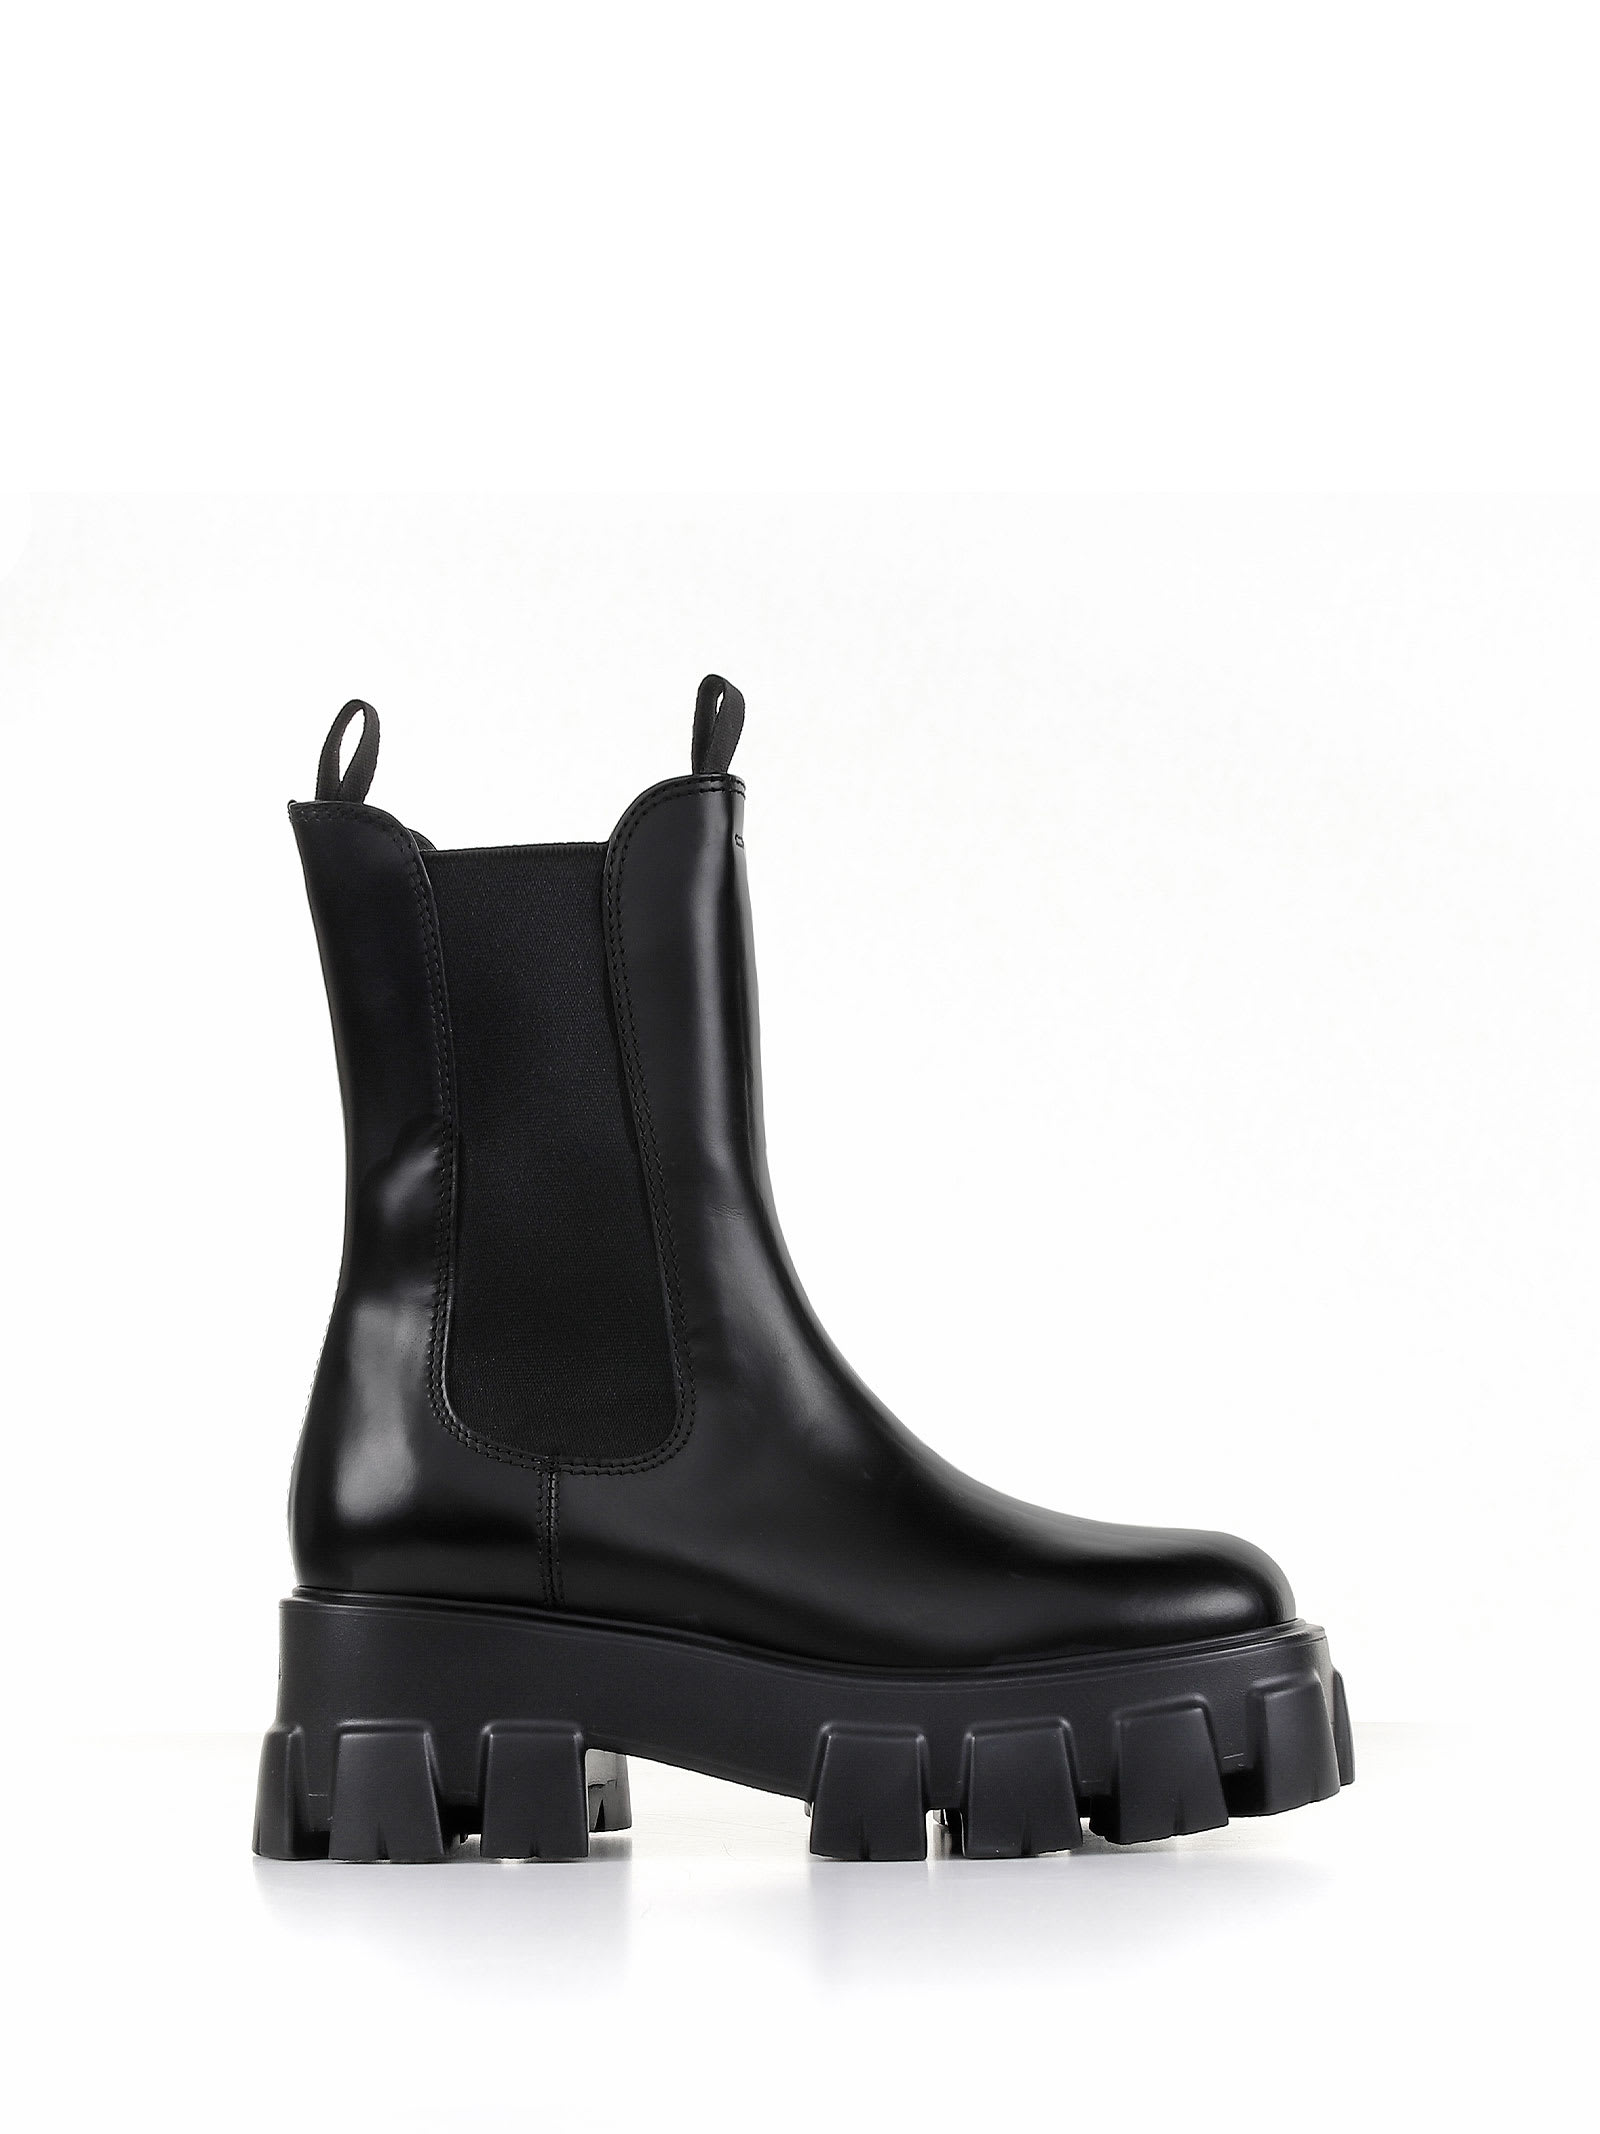 Prada High Monolith Leather Ankle Boots